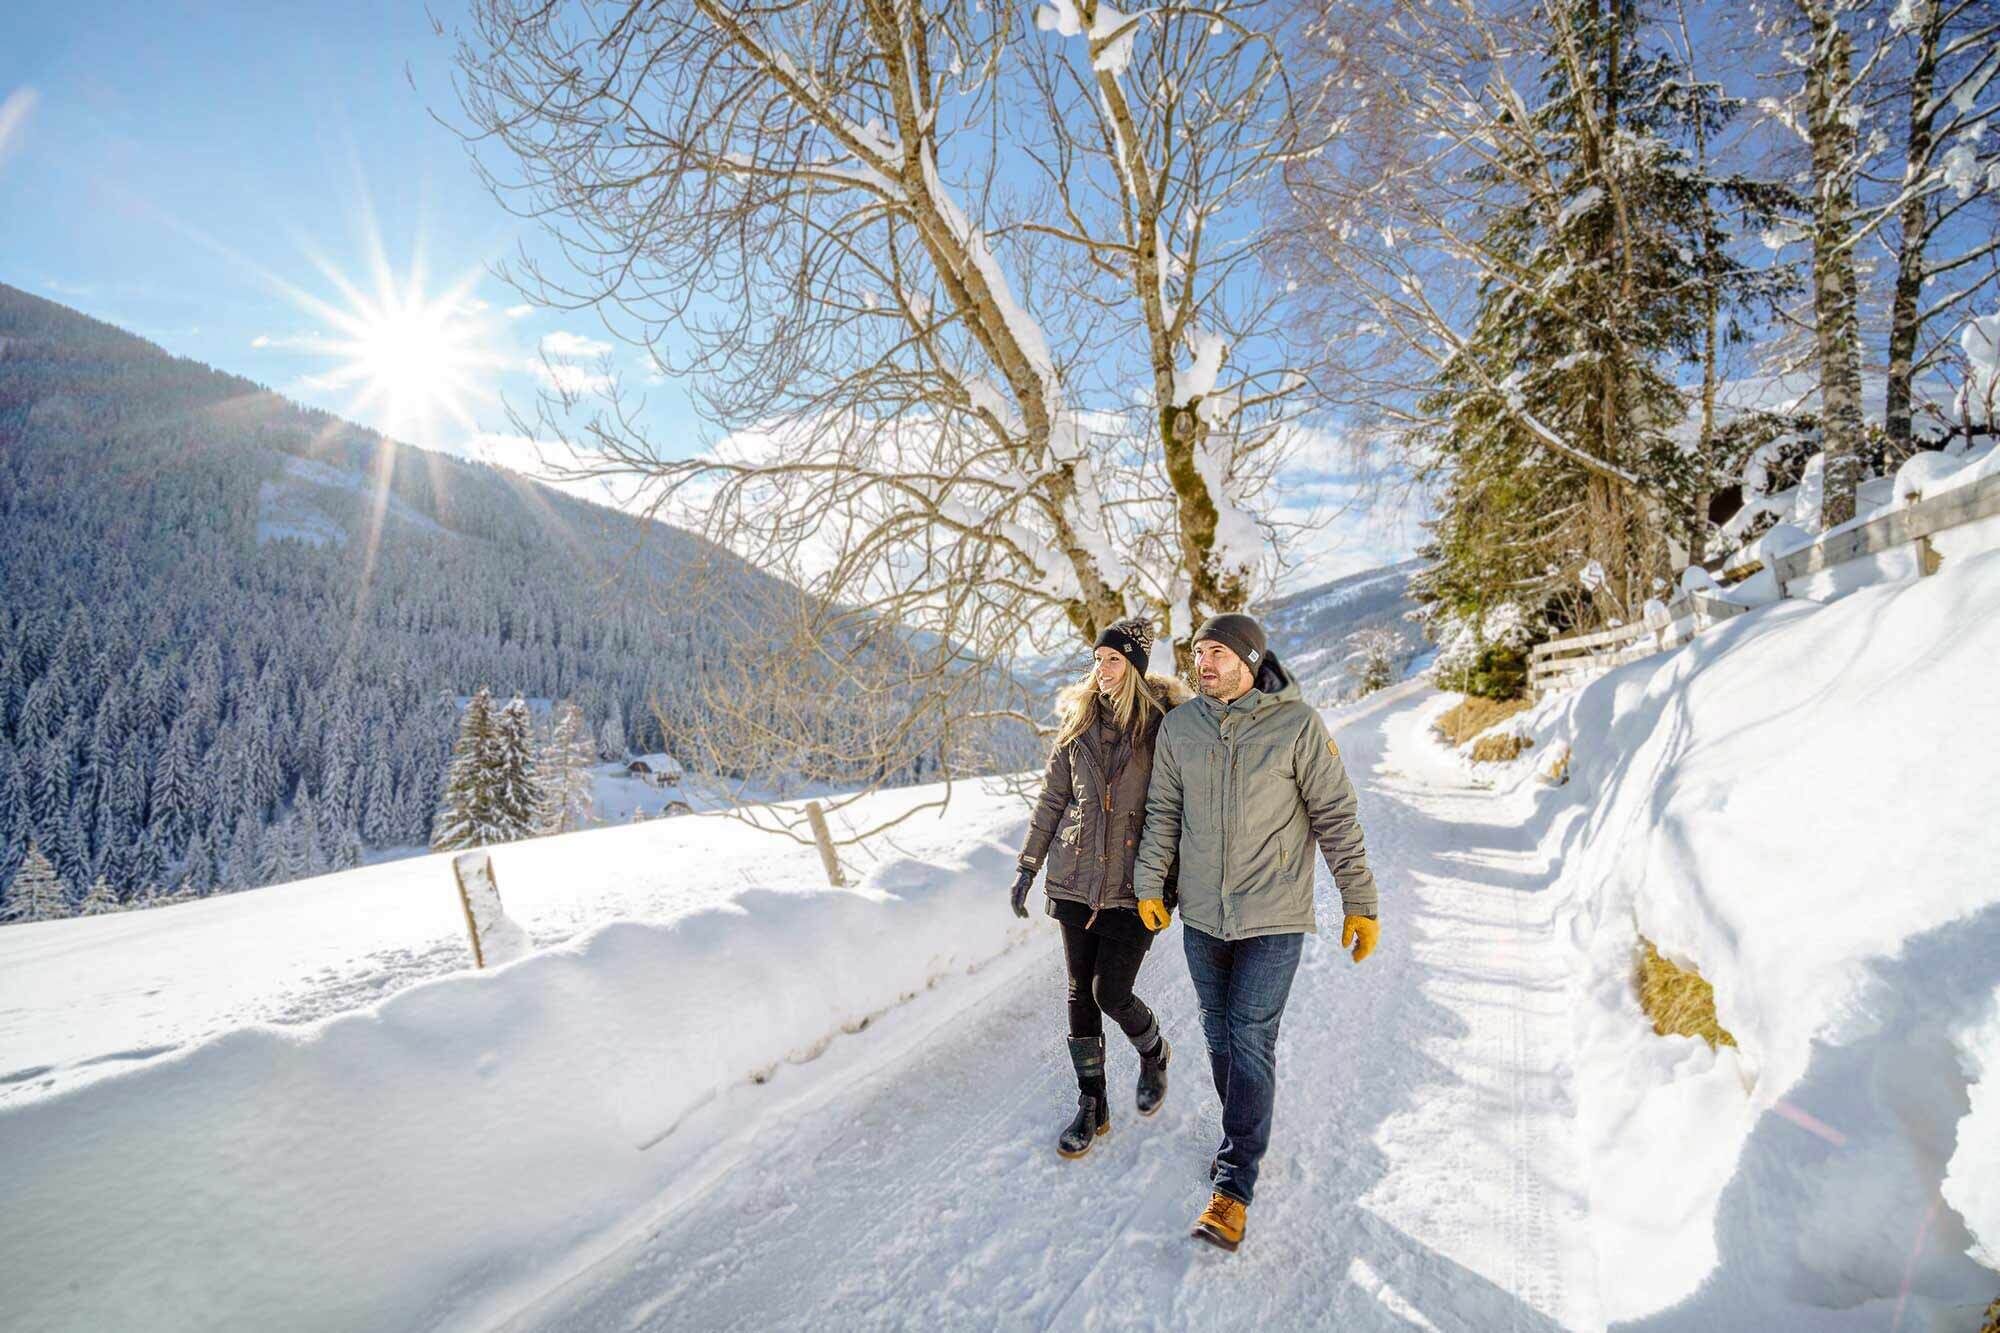 A couple going for a winter hike in the snow in nature.